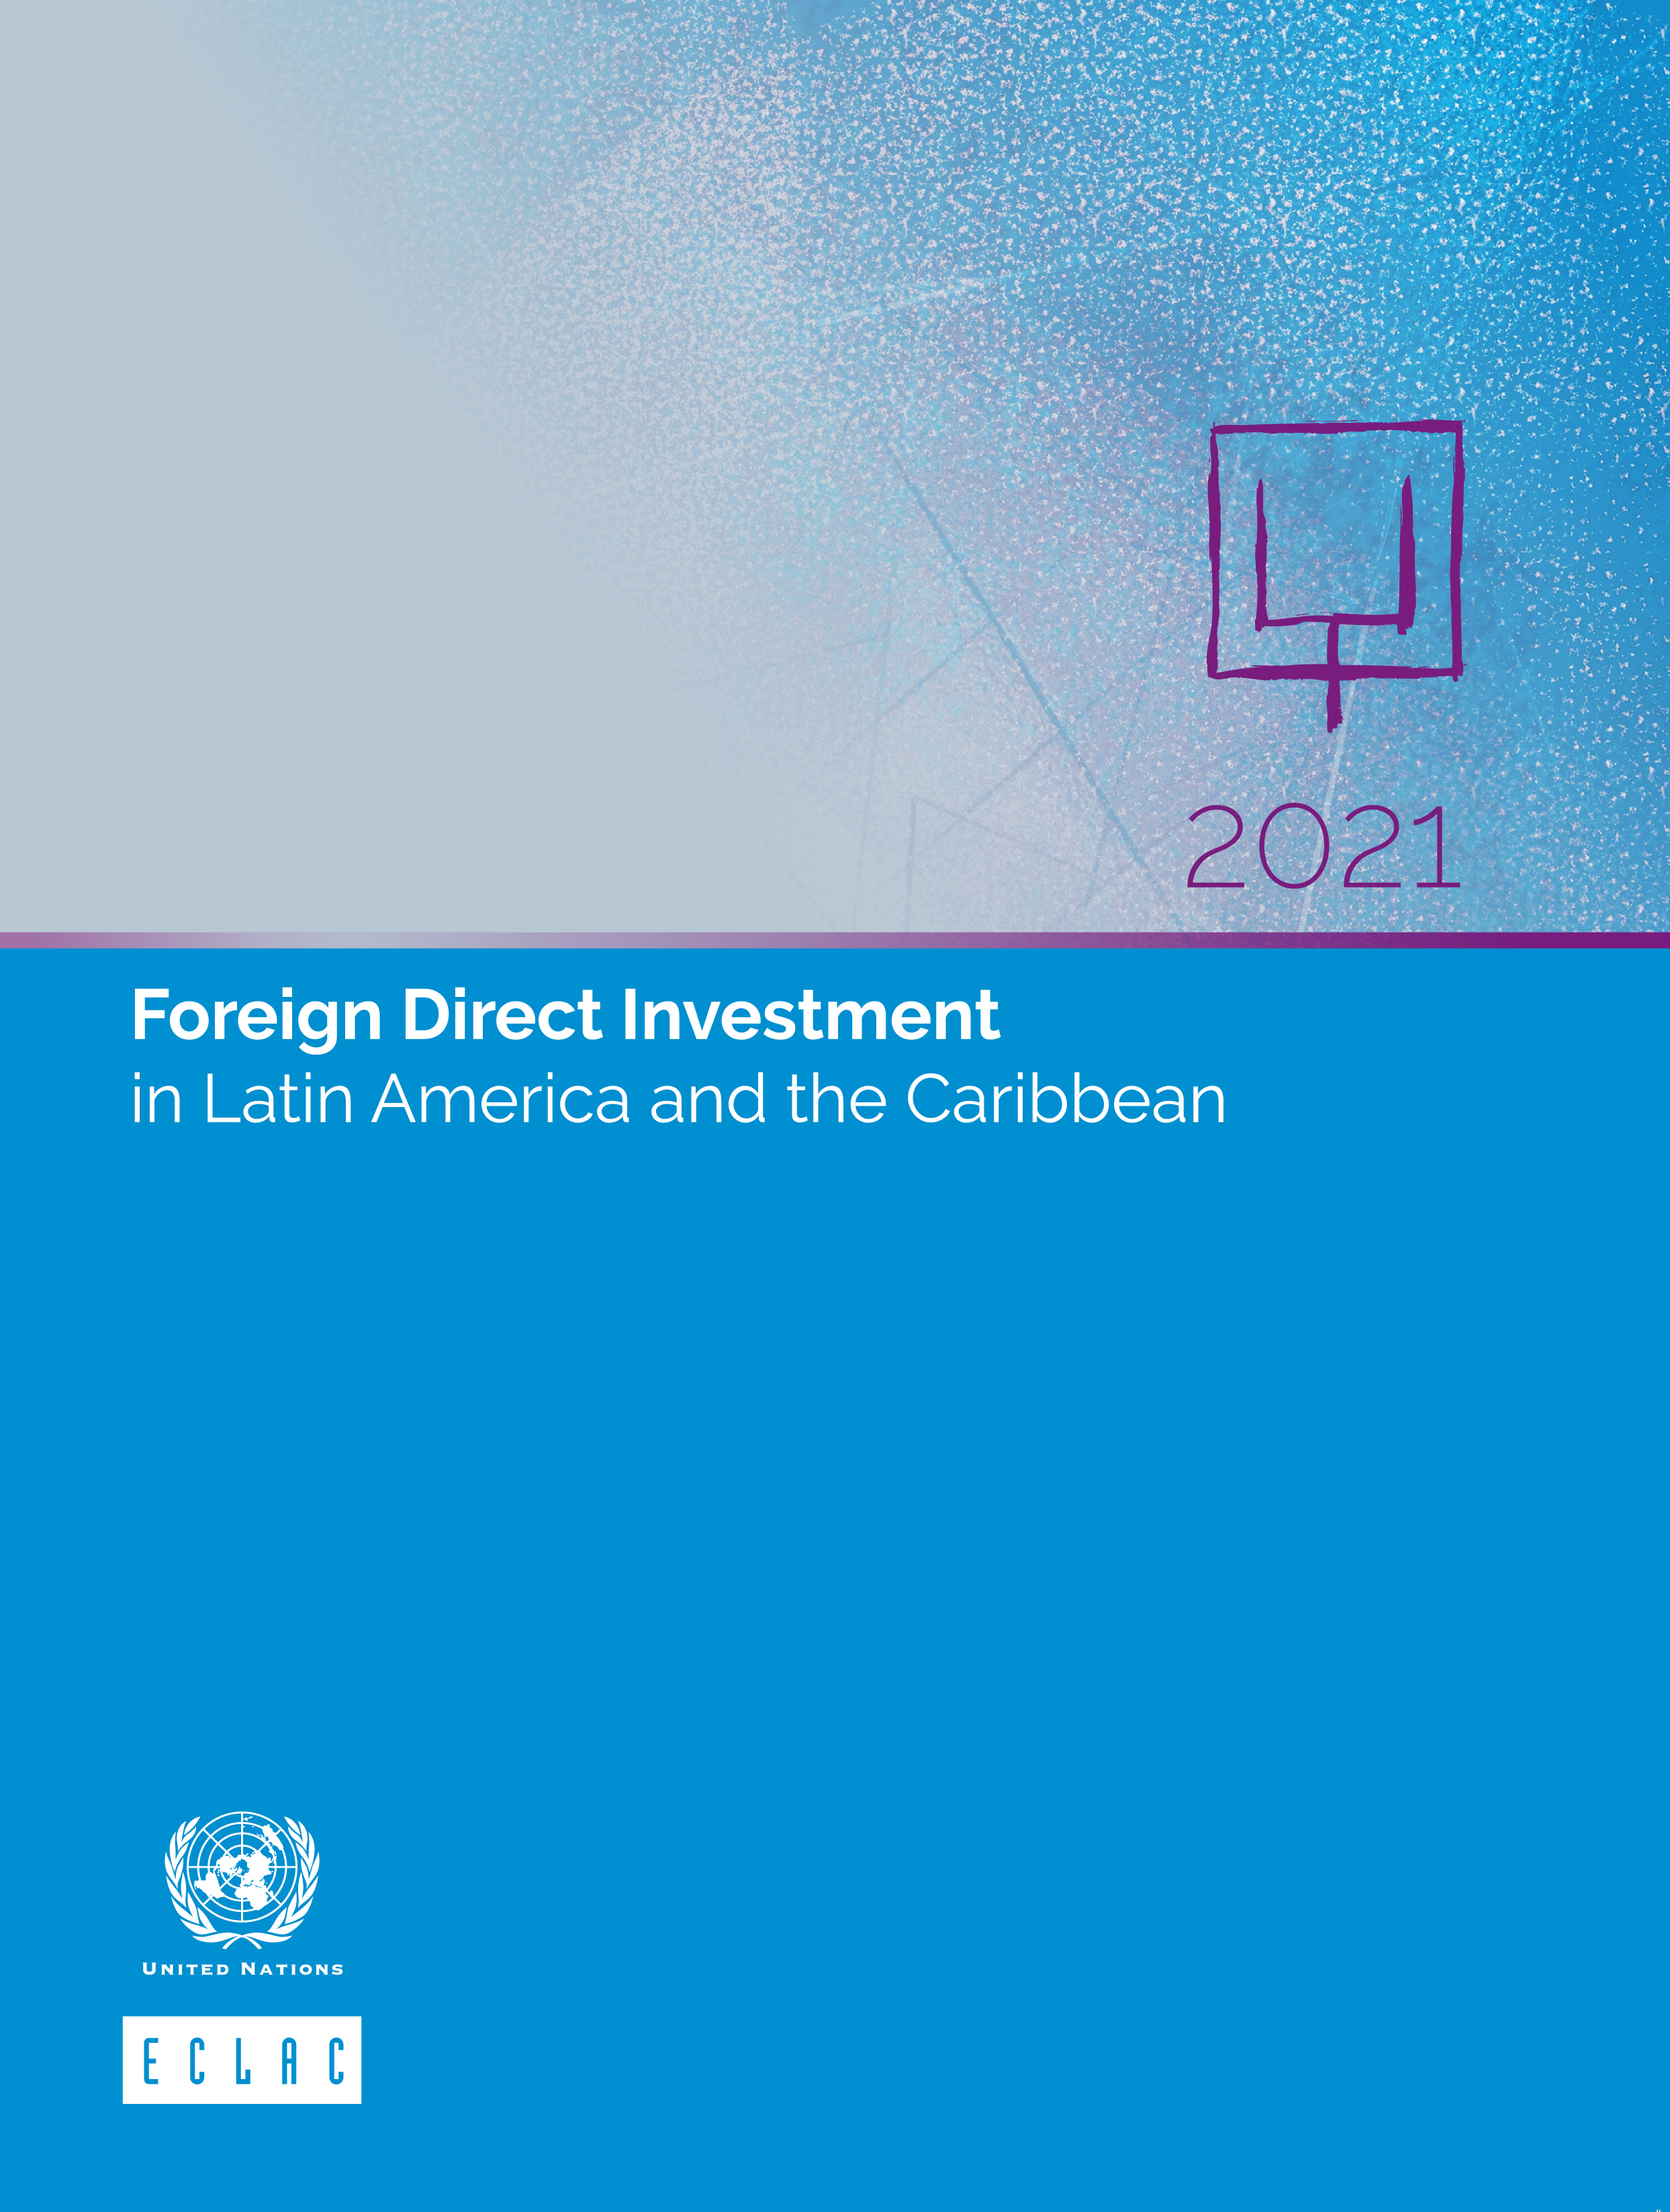 image of Foreign Direct Investment in Latin America and the Caribbean 2021